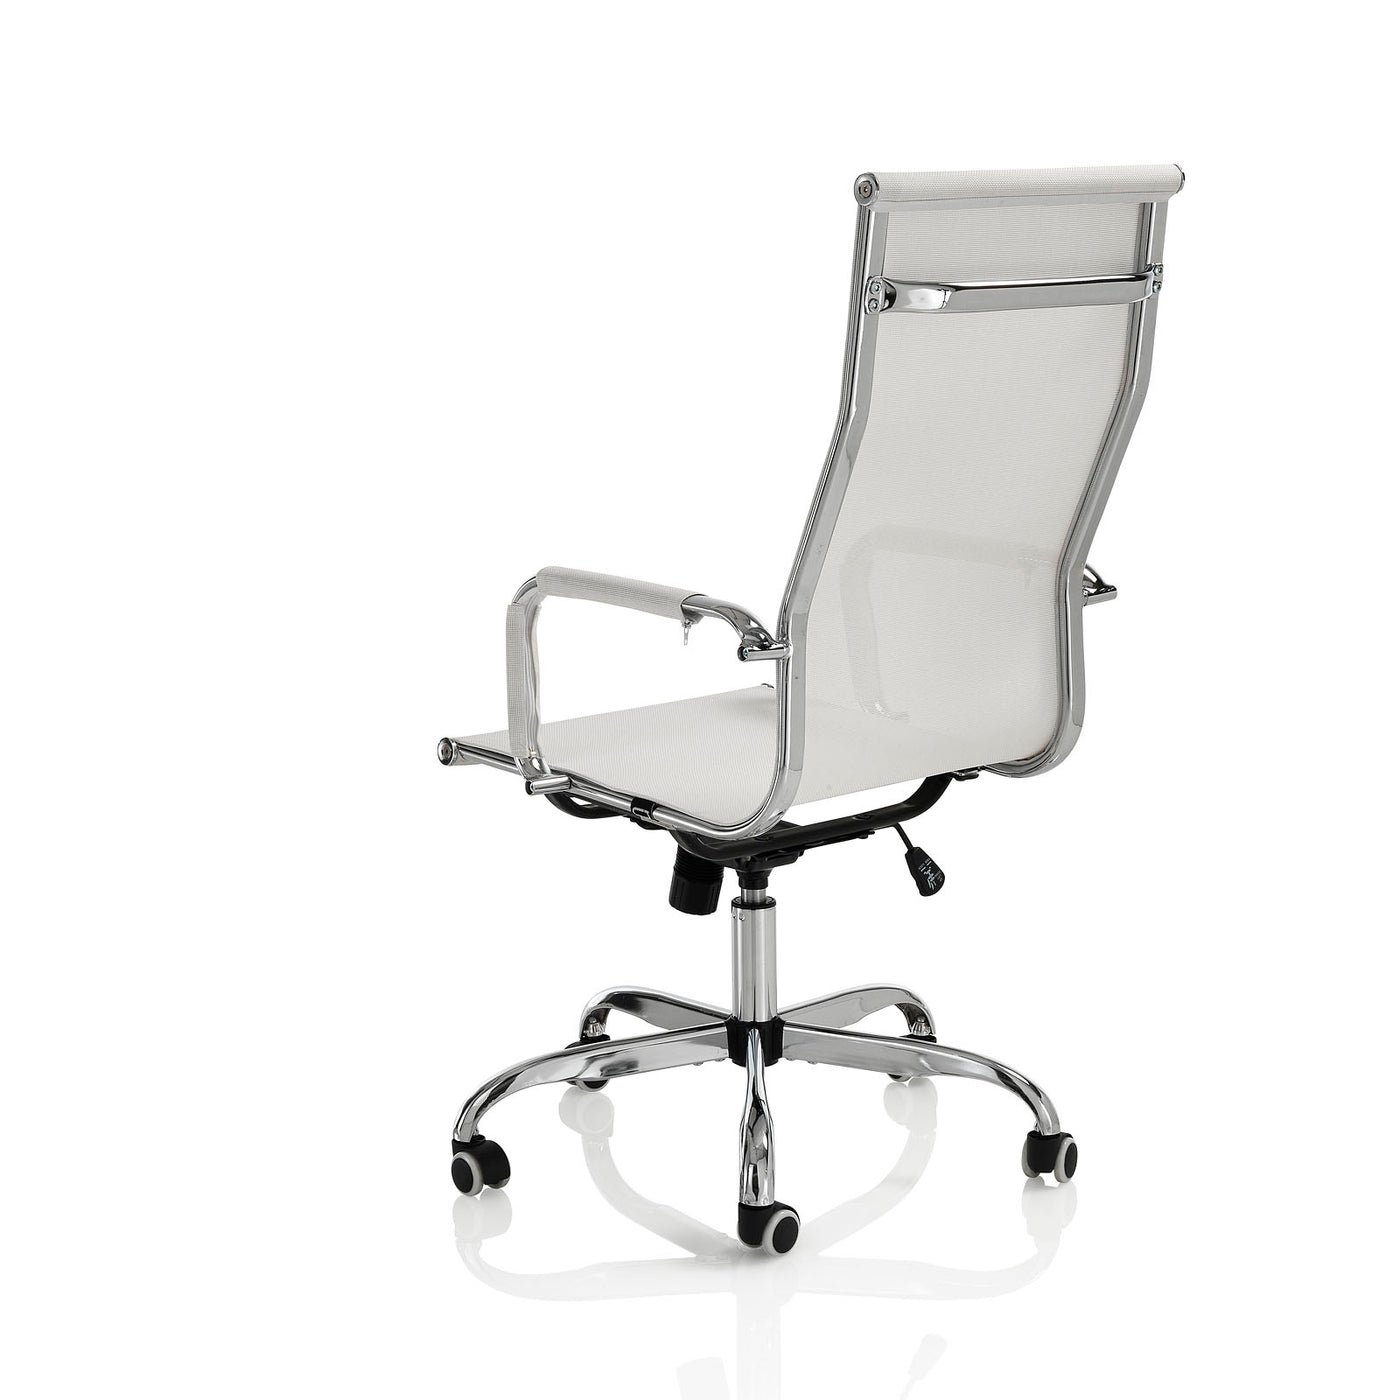 INGRID white executive office chair